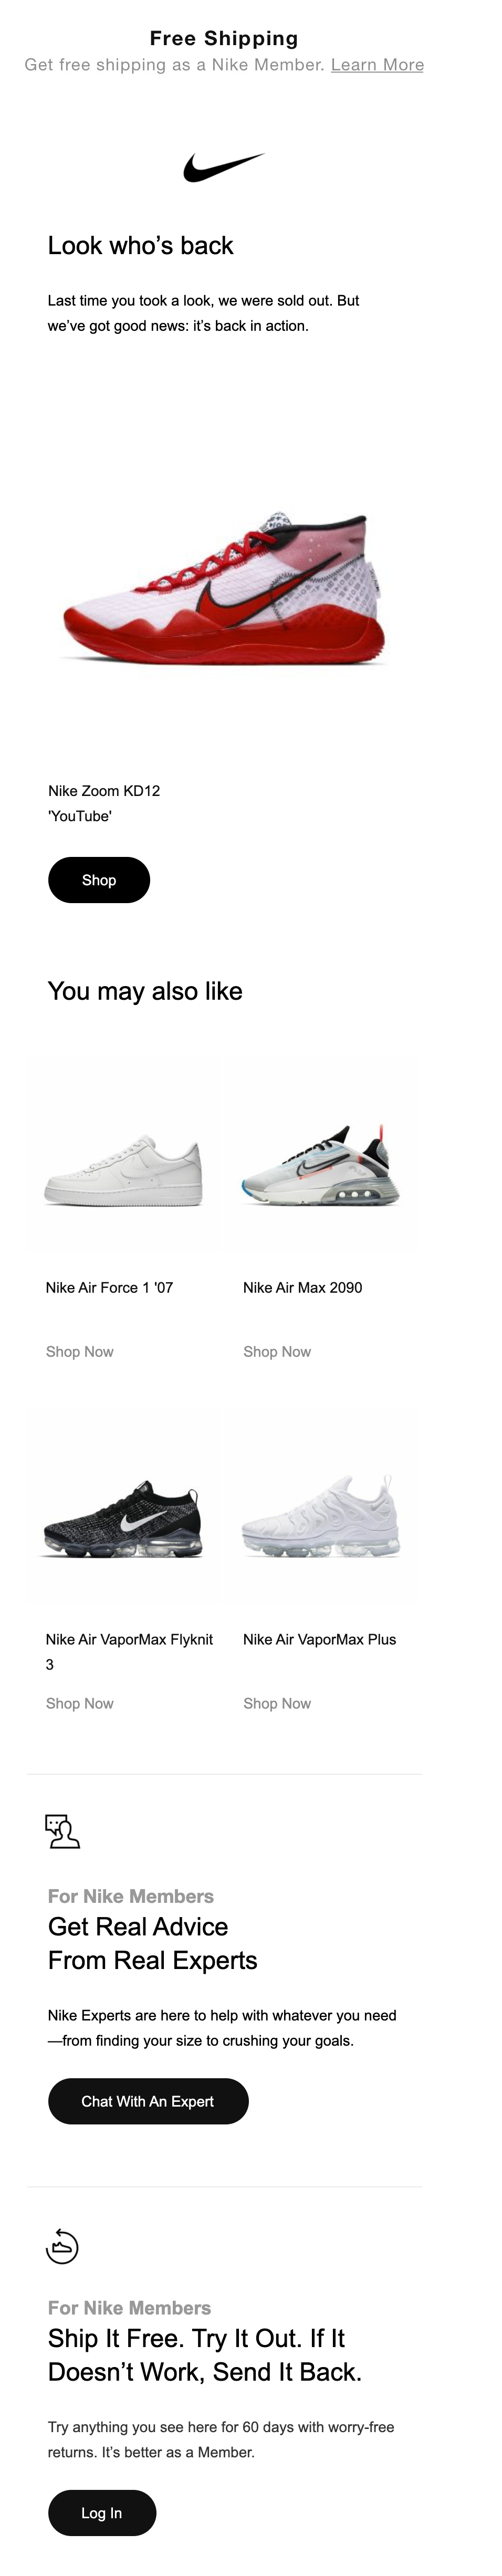 7 takeaways of Nike's email journey from welcome to post-purchase. | by  Mainul Quader | Medium